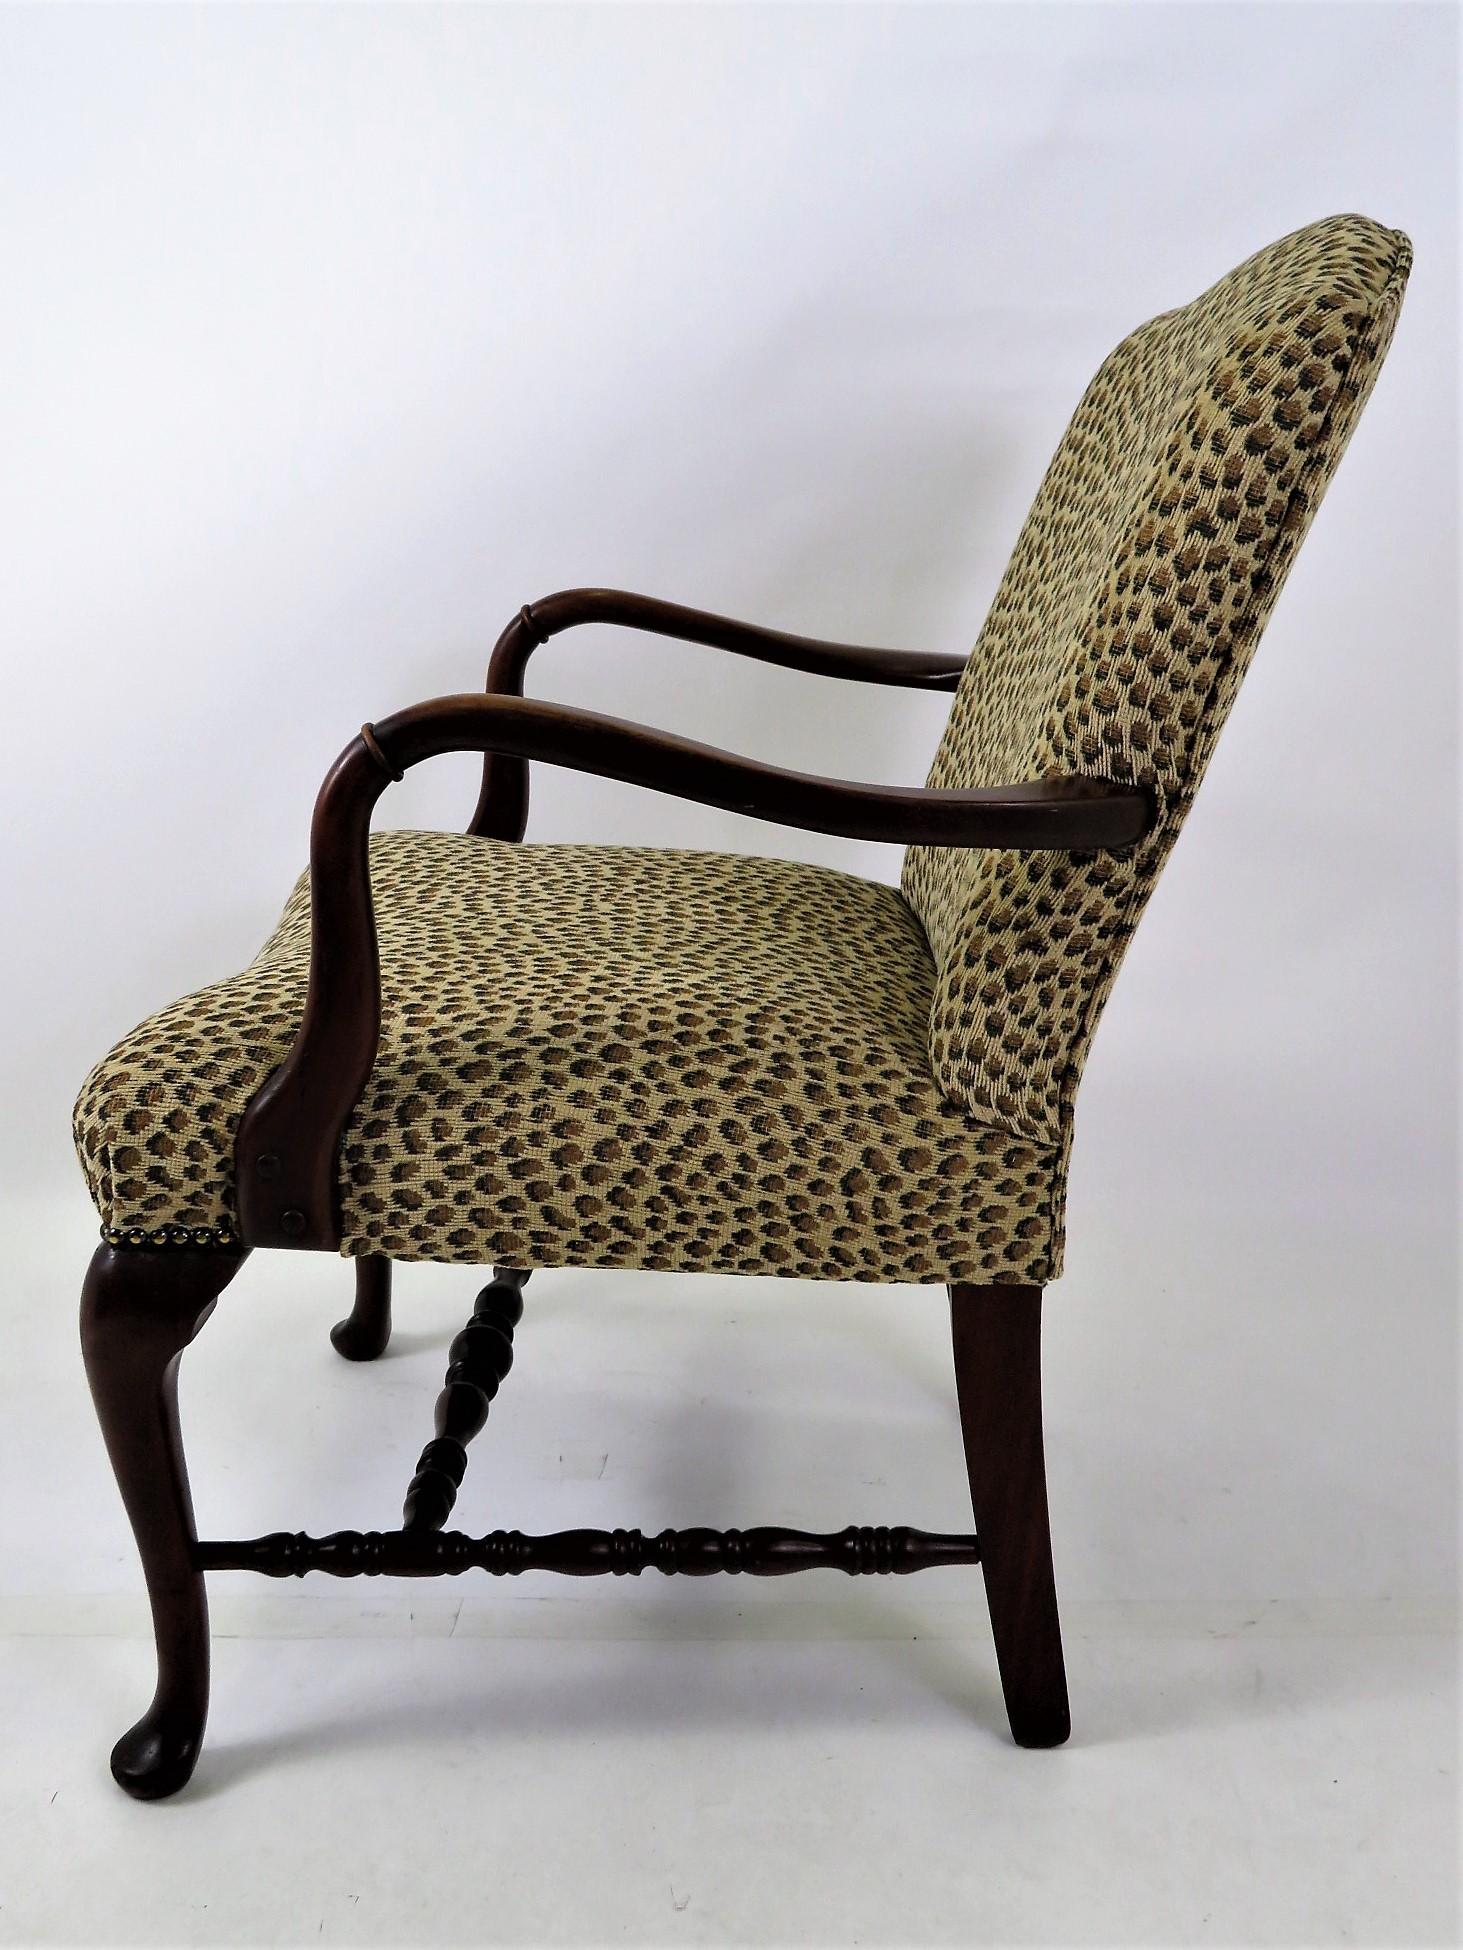 Mid-20th Century 1940s American Queen Anne Style Armchair in Leopard